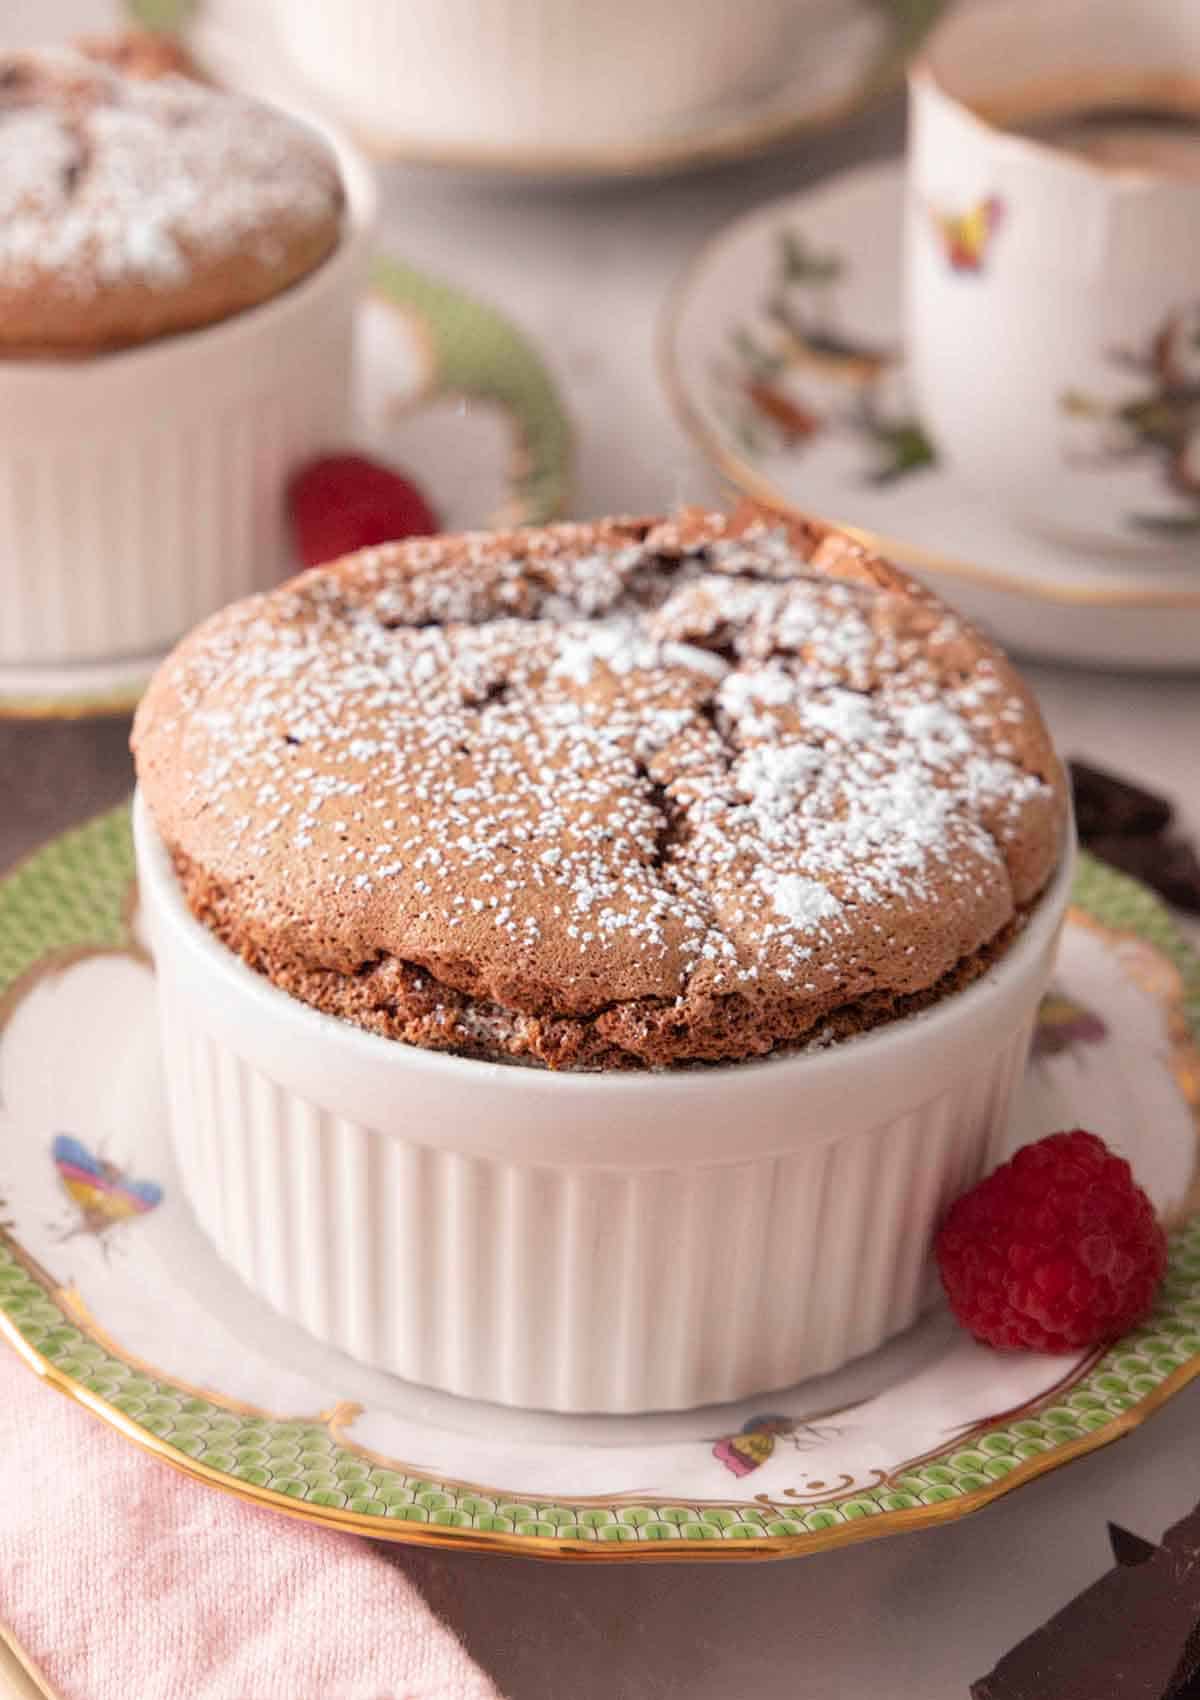 A ramekin of chocolate souffle with powdered sugar on top with a raspberry beside it.